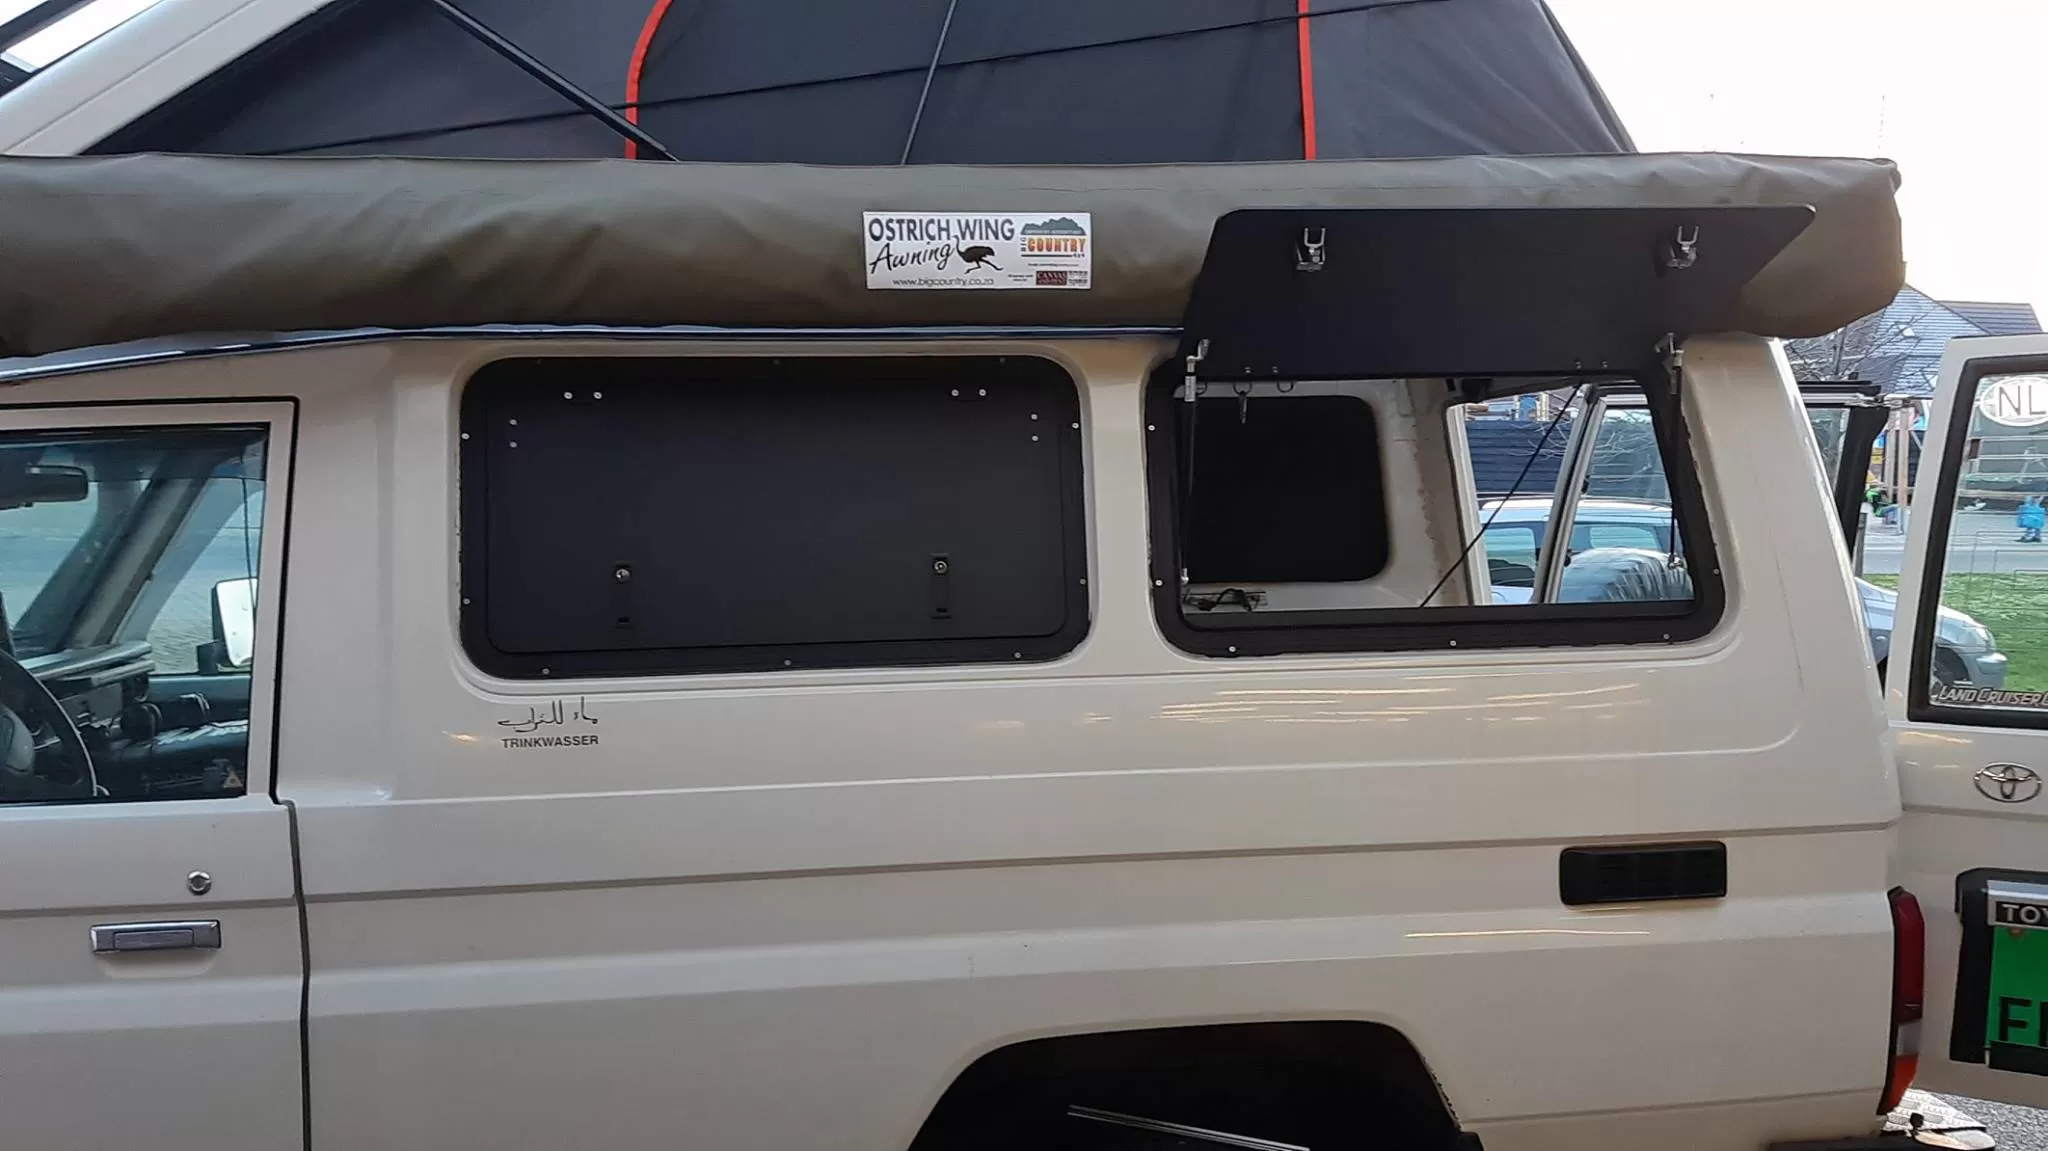 Explore Glazing Toyota Troop Carrier gullwing aluminium front and rear side